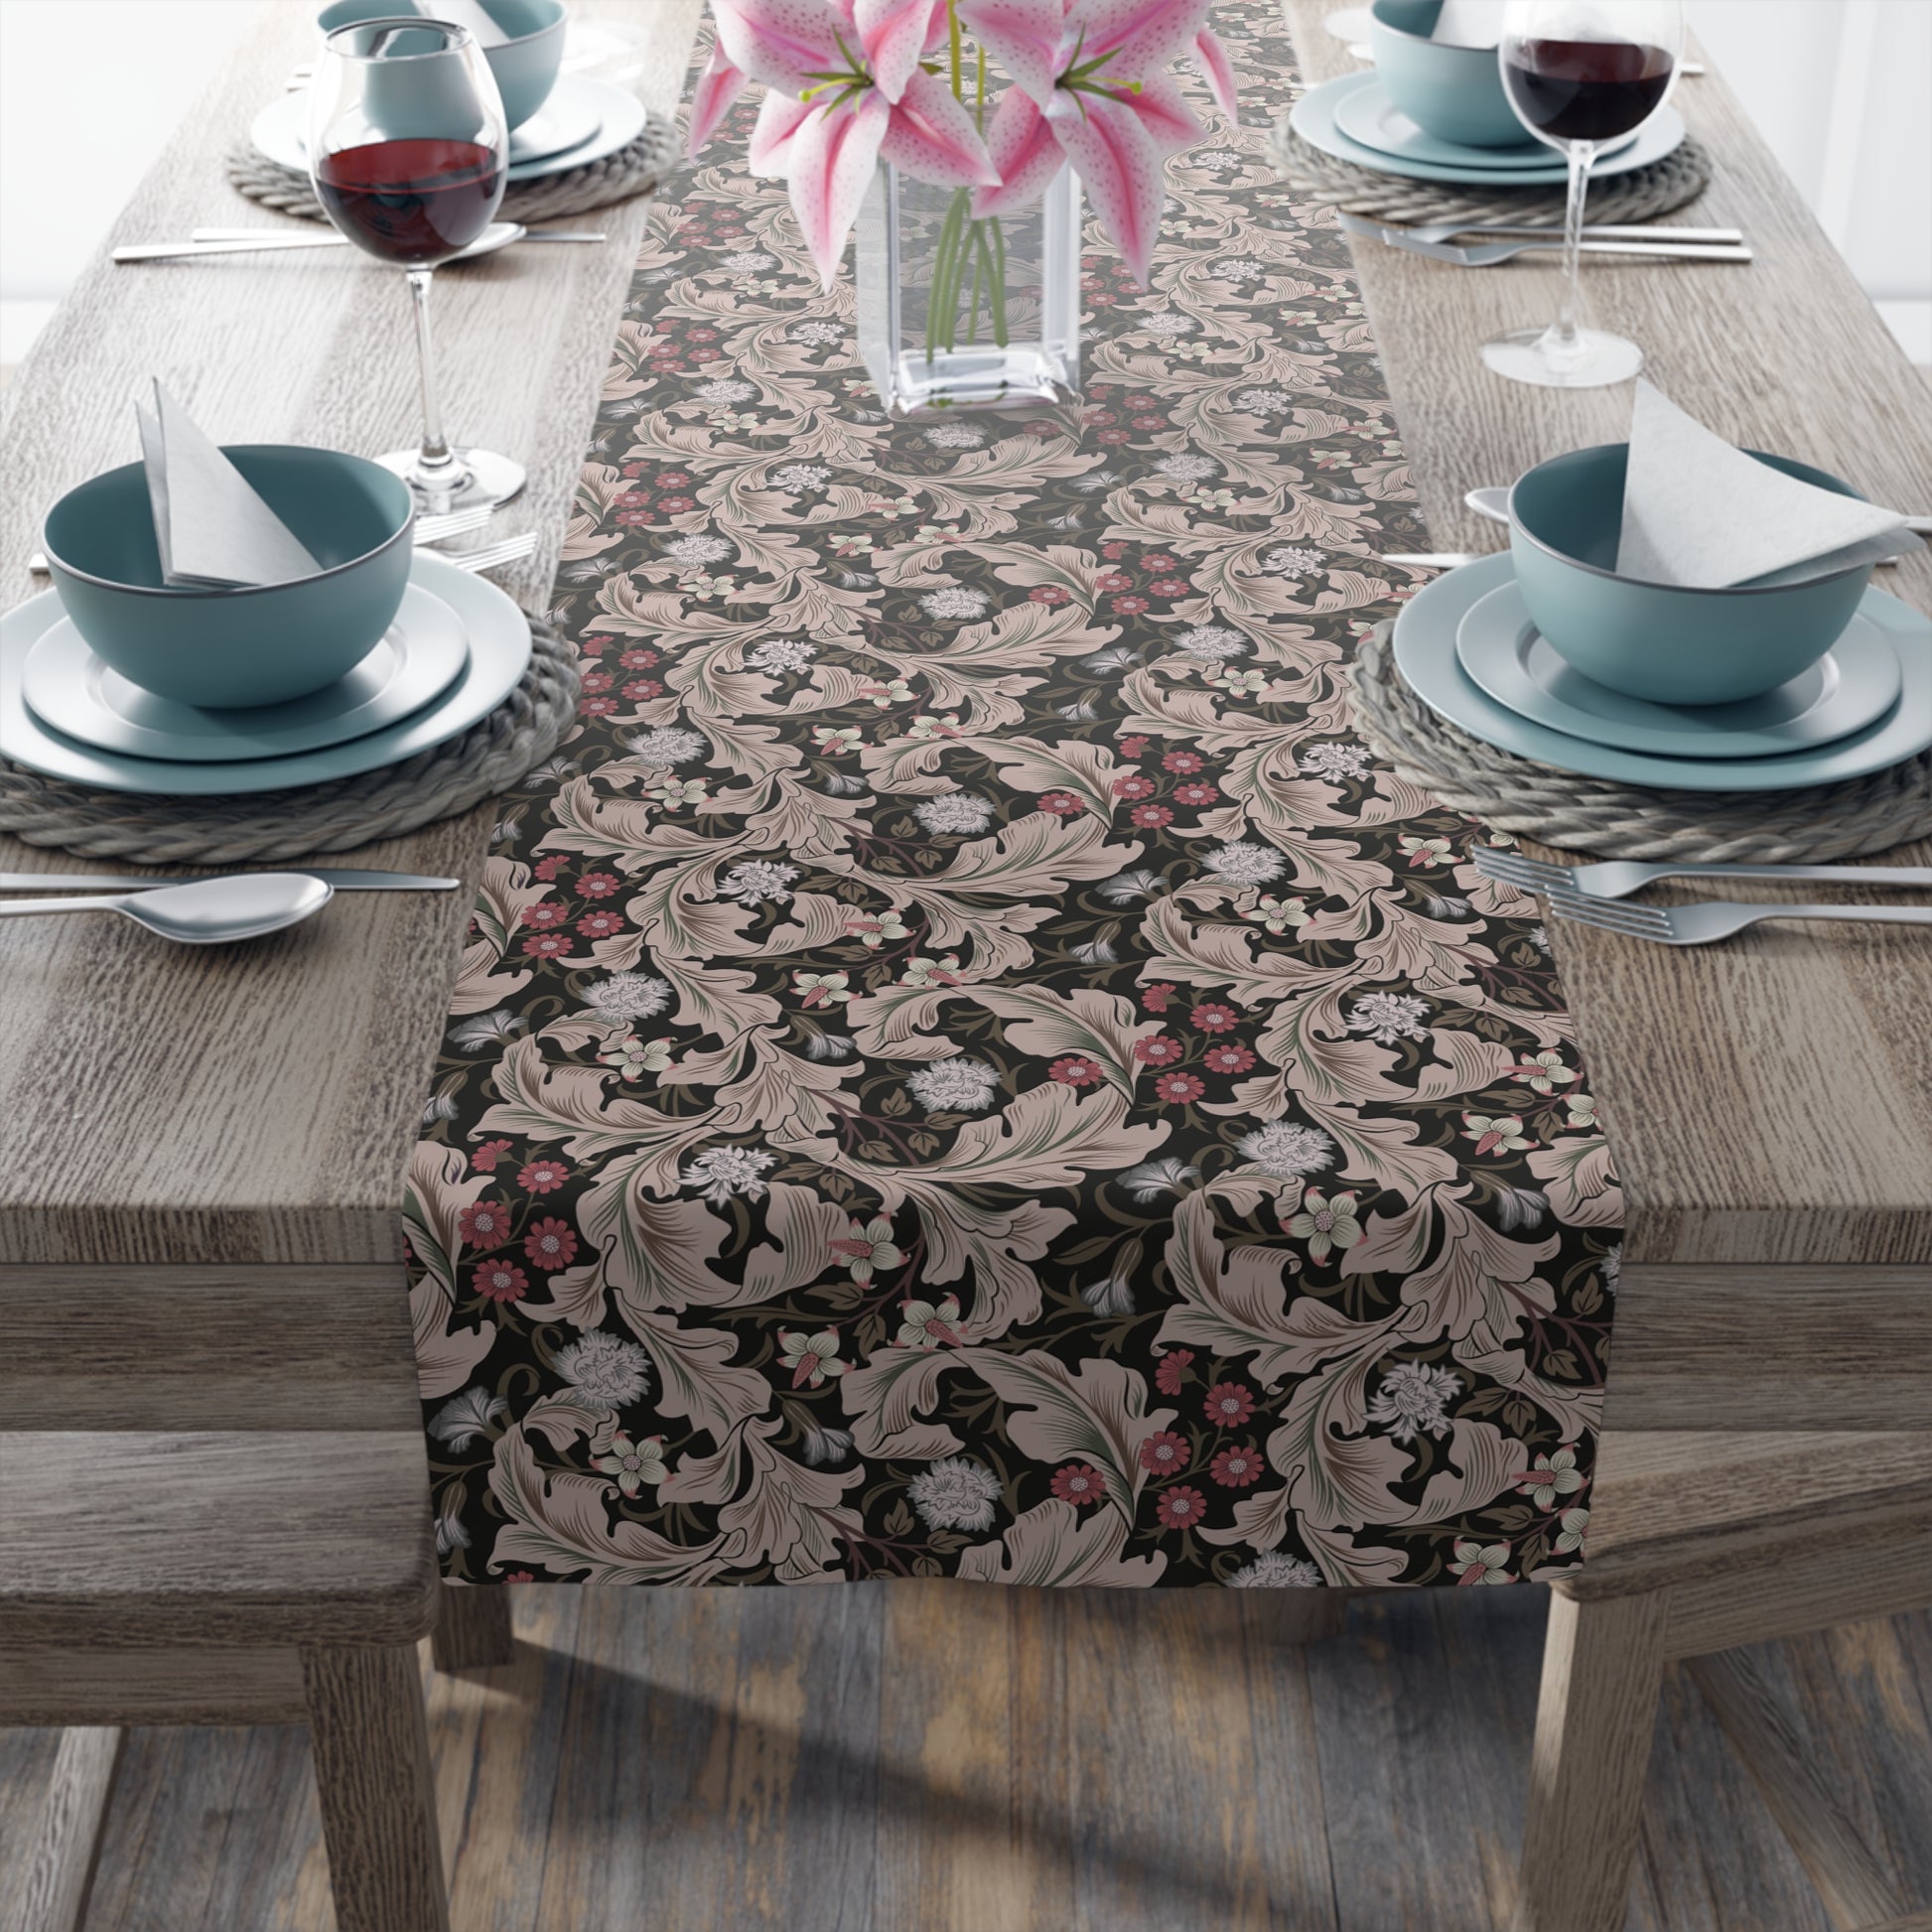 william-morris-co-table-runner-leicester-collection-mocha-9